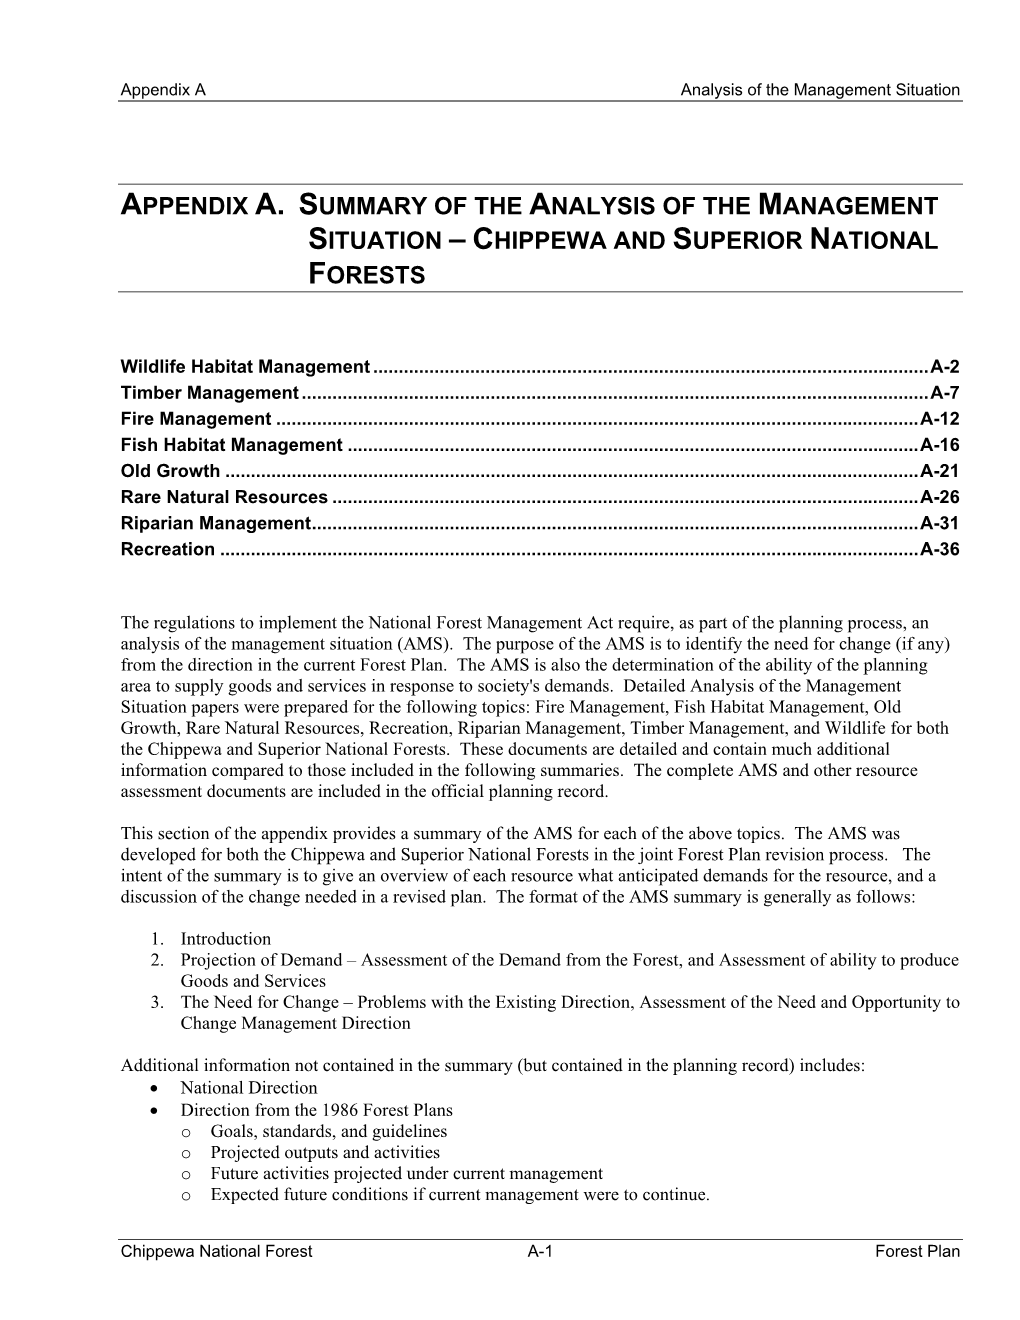 Appendix a Analysis of the Management Situation